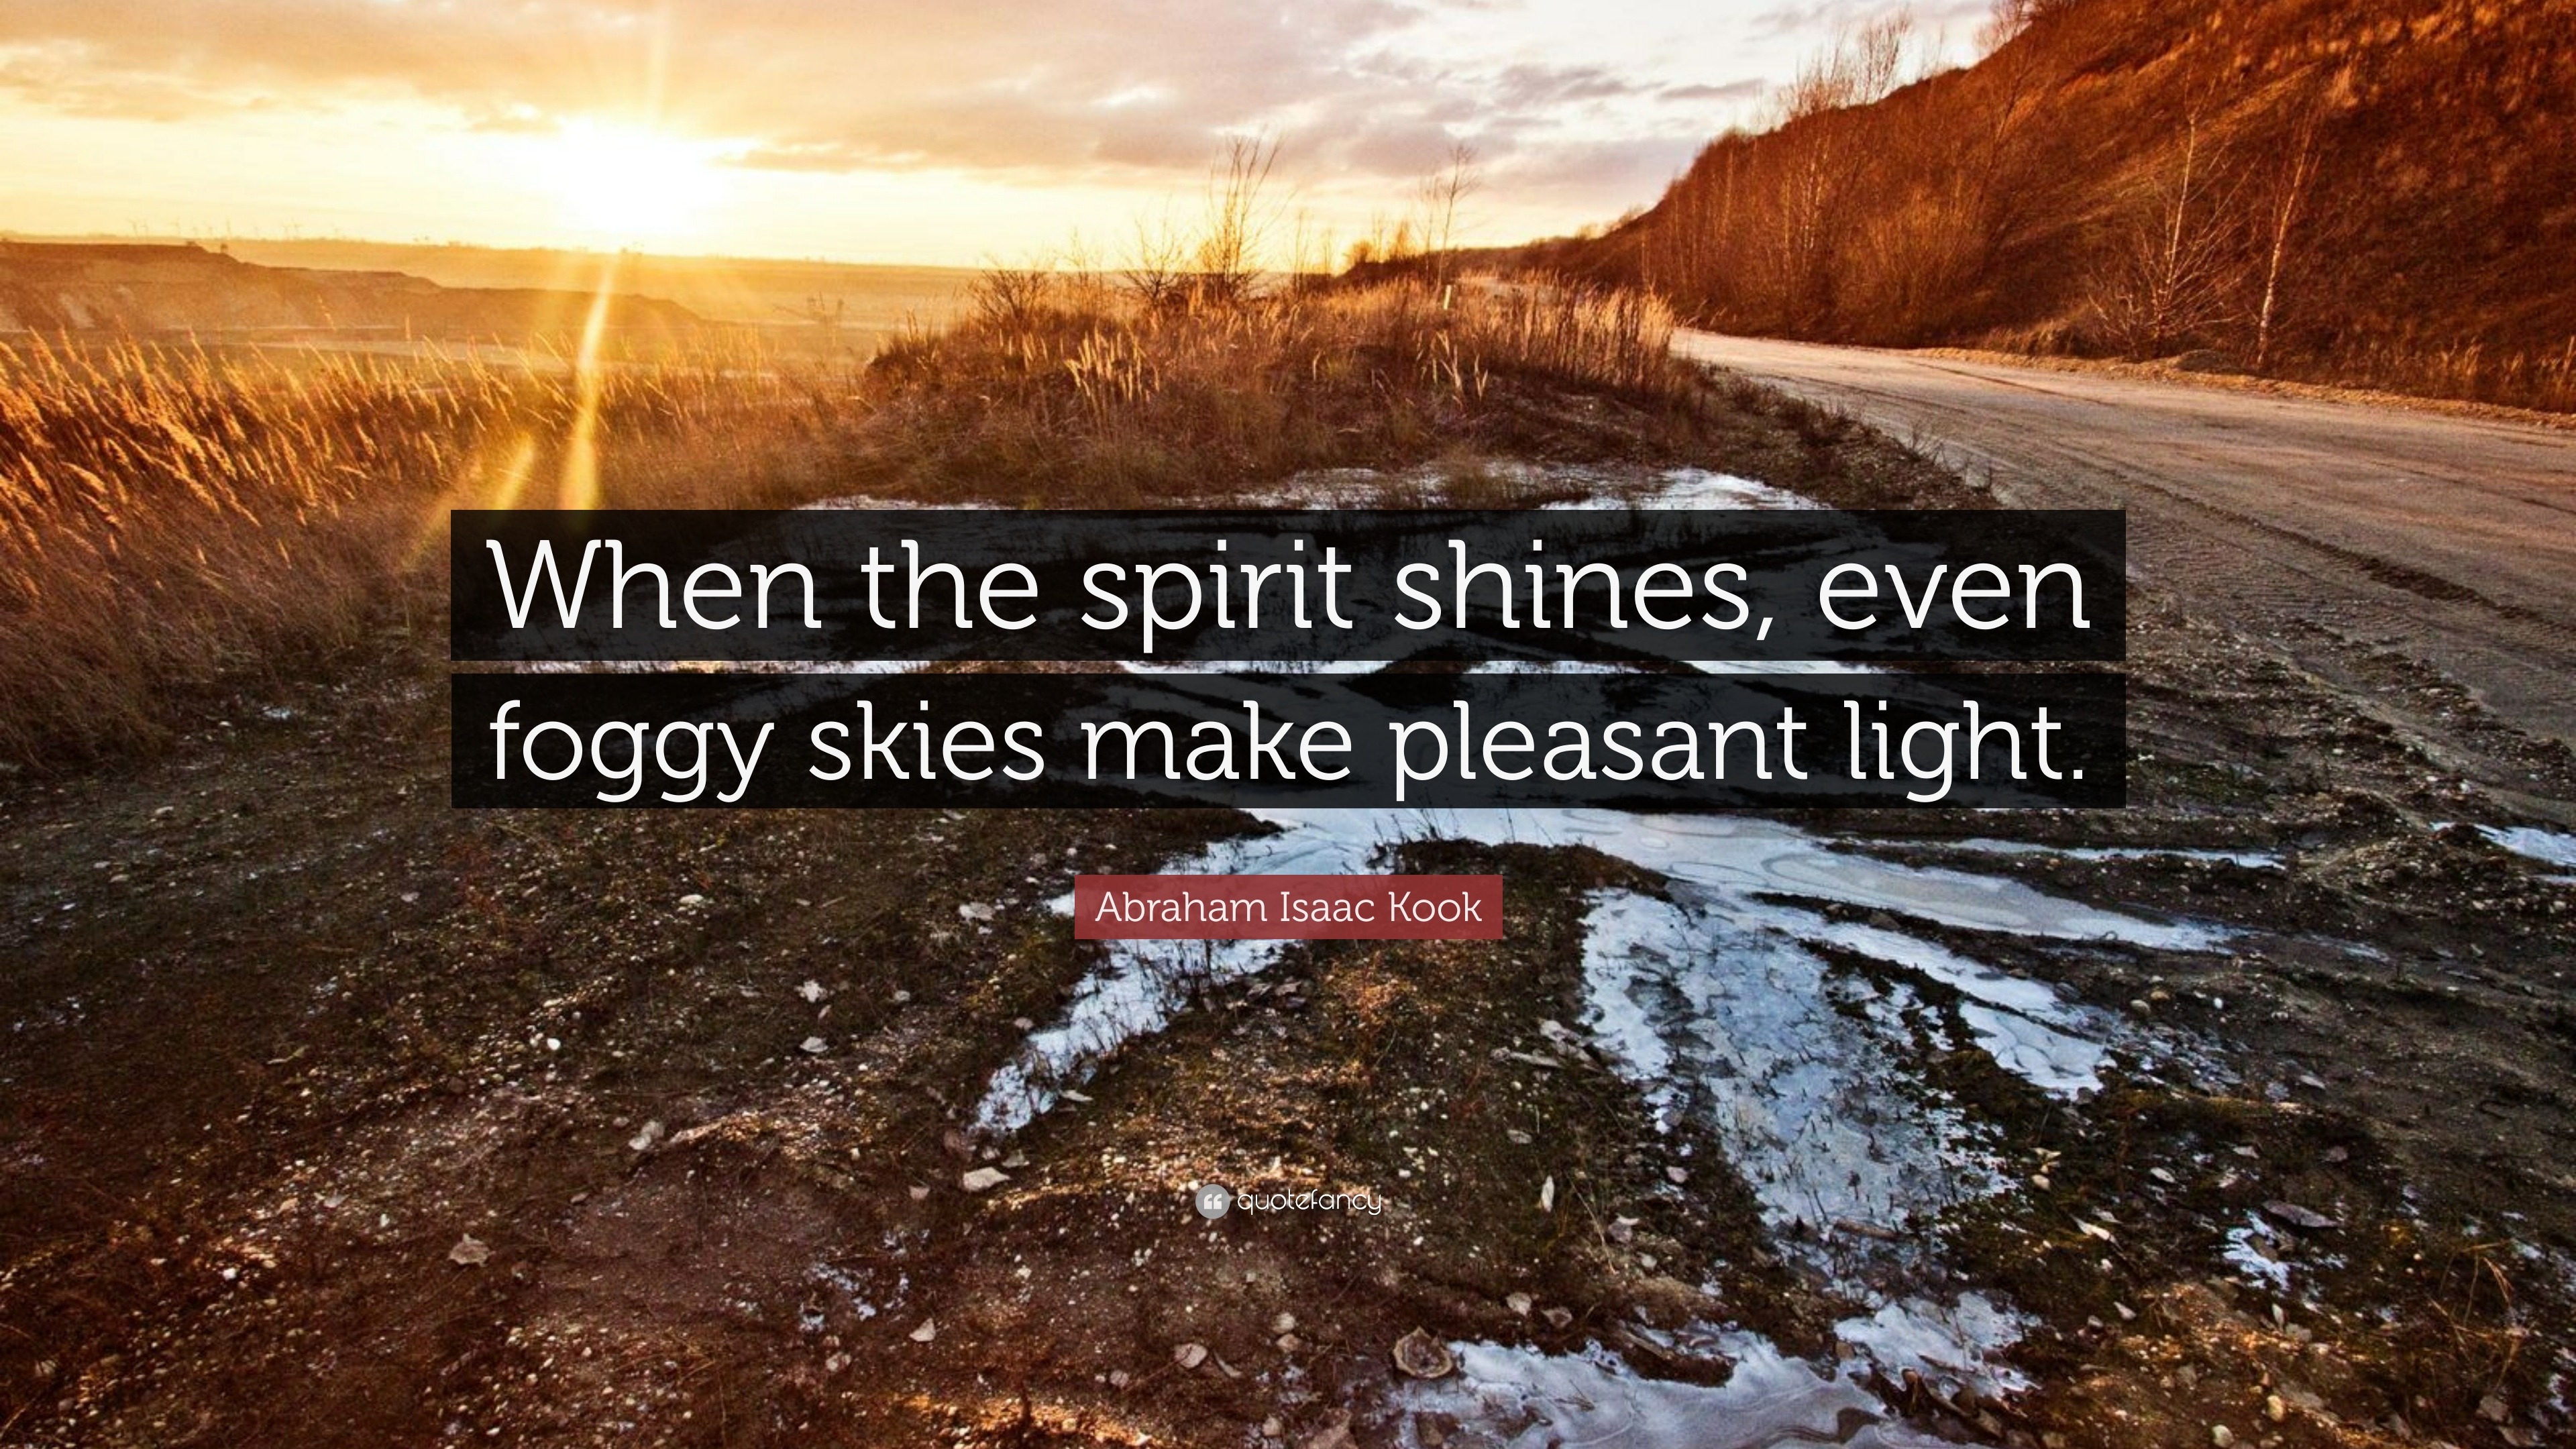 Abraham Isaac Kook Quote “when The Spirit Shines Even Foggy Skies Make Pleasant Light” 